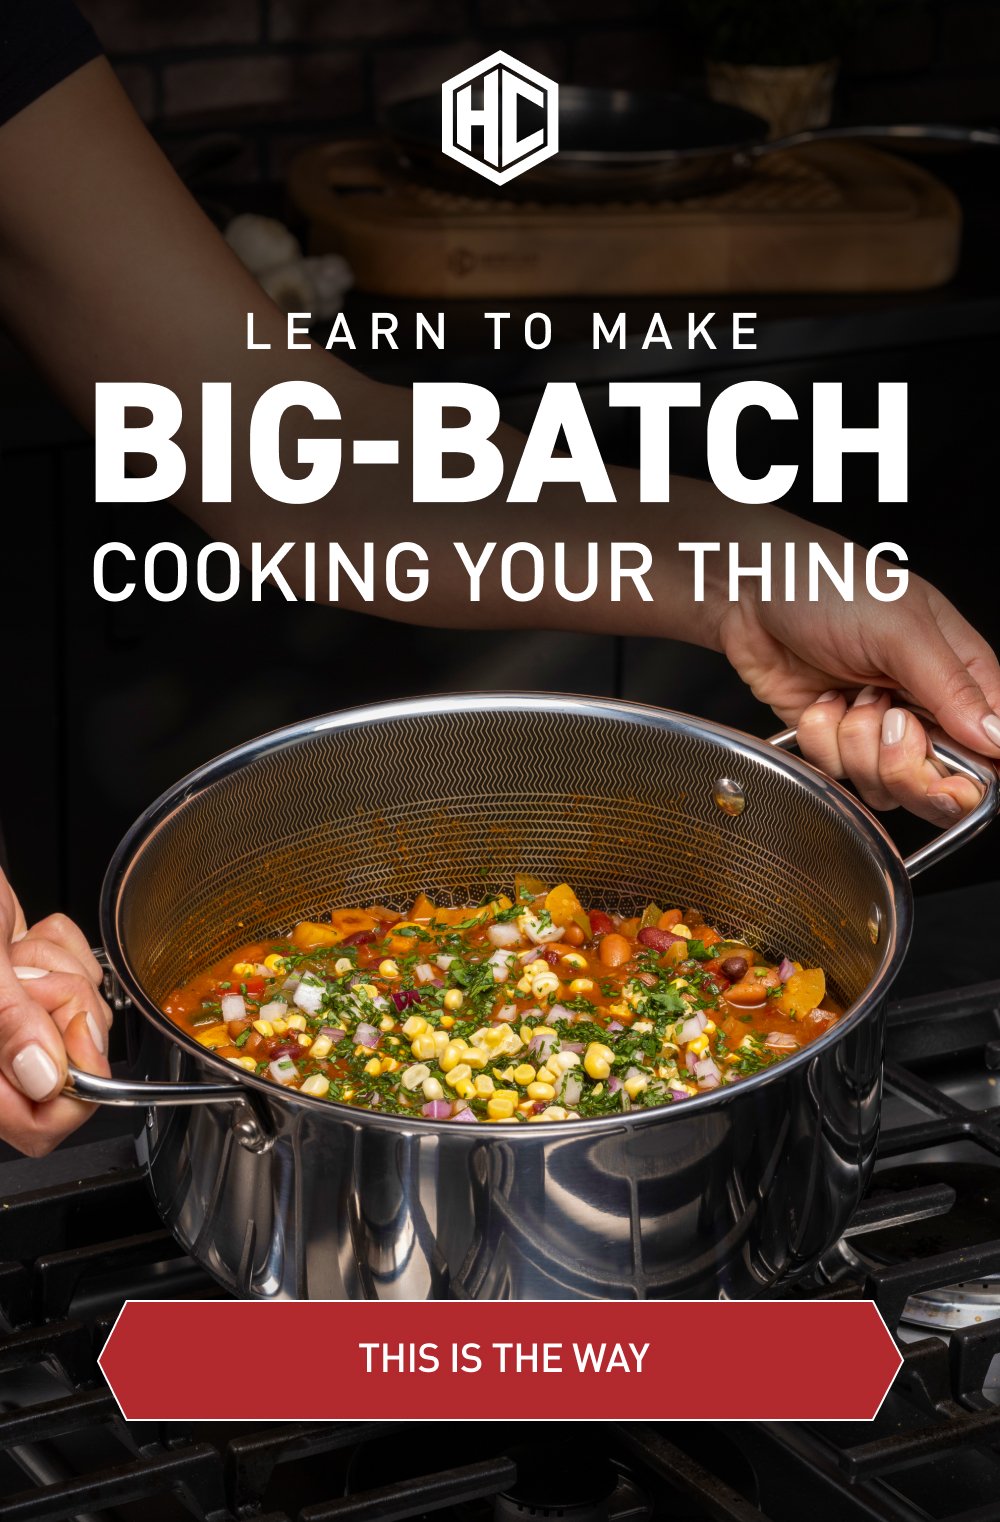 learn to make big-batch cooking your thing [THIS IS THE WAY]